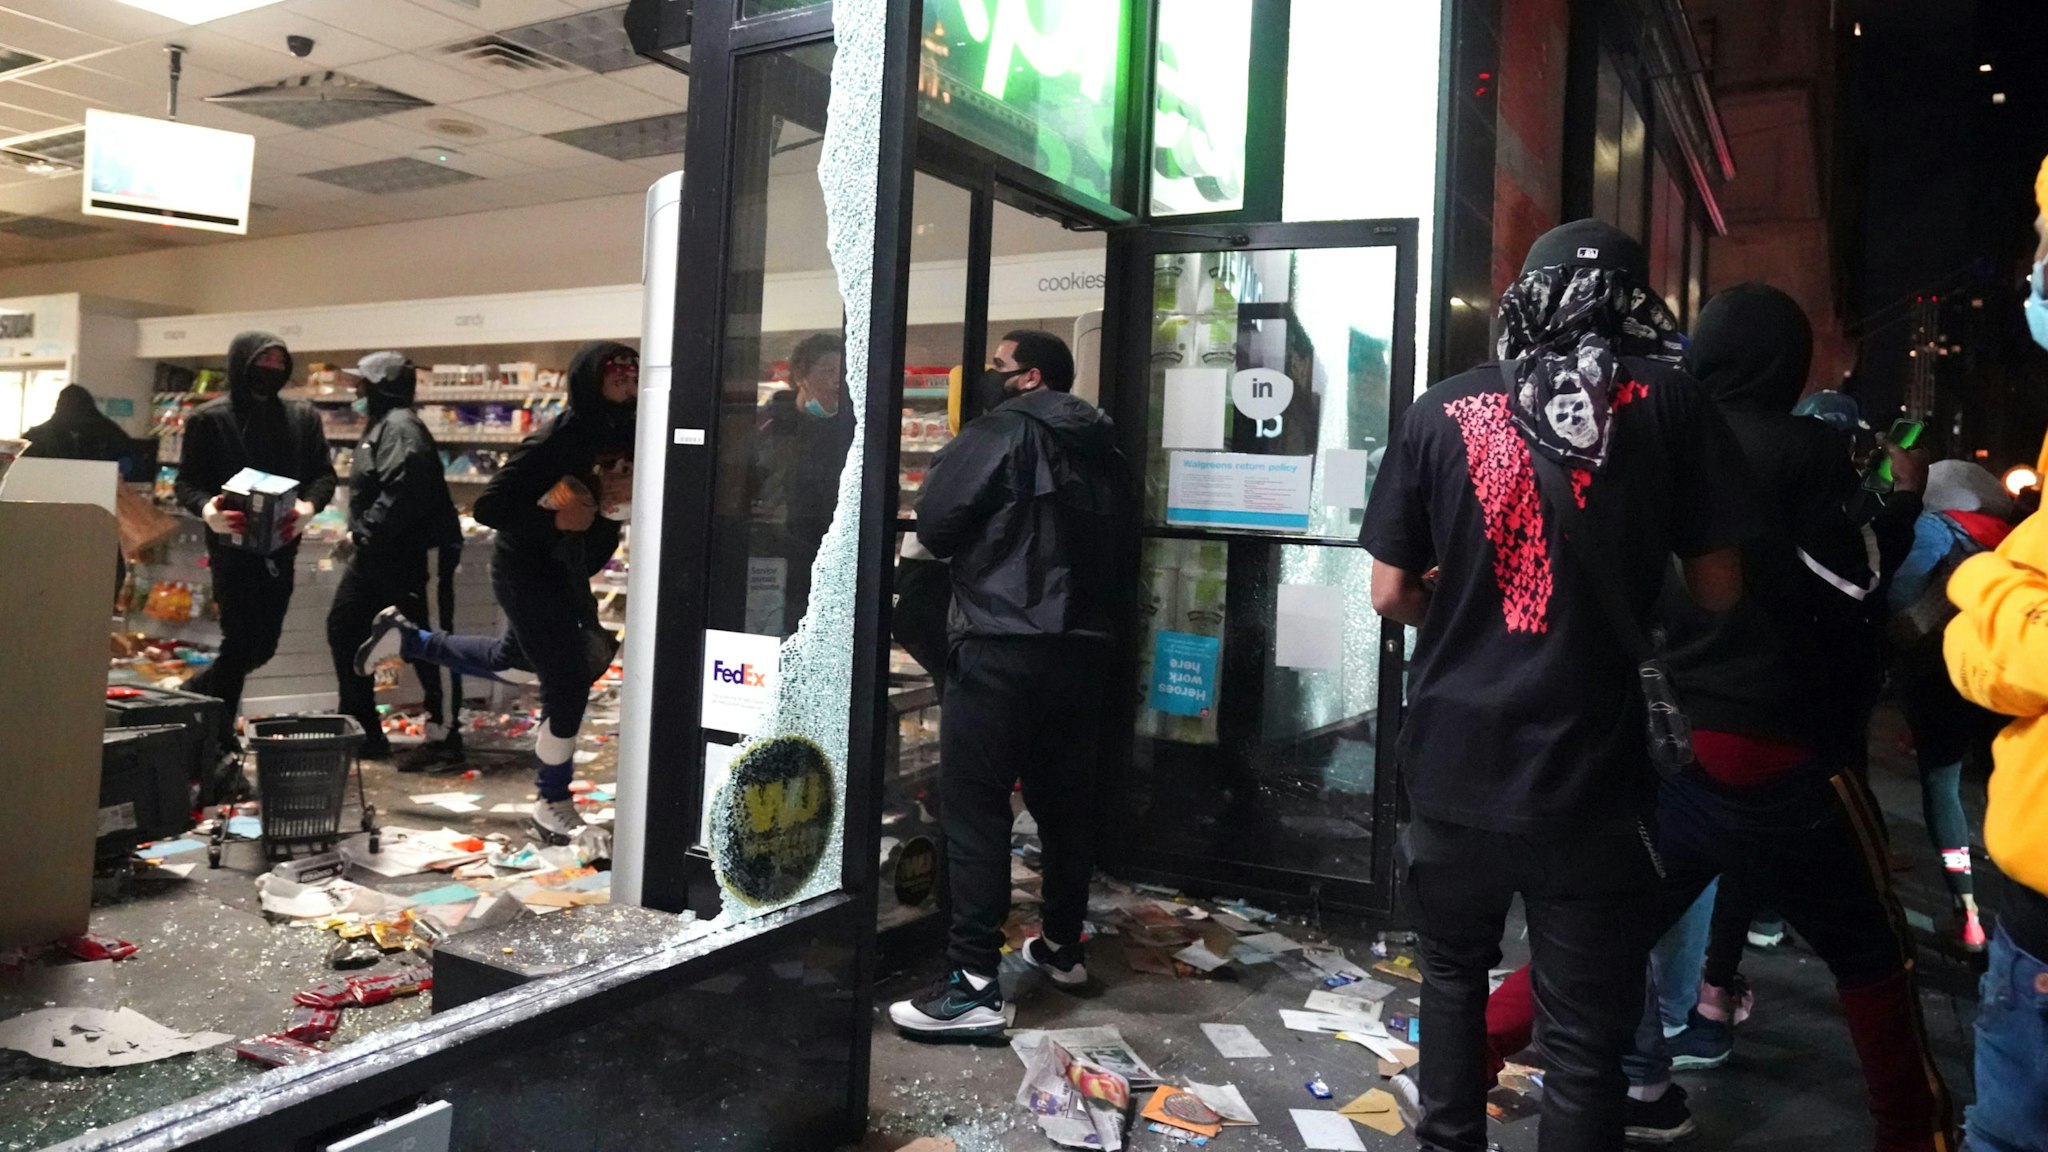 People loot a store during demonstrations over the death of George Floyd by a Minneapolis police officer on June 1, 2020 in New York. - New York's mayor Bill de Blasio today declared a city curfew from 11:00 pm to 5:00 am, as sometimes violent anti-racism protests roil communities nationwide. Saying that "we support peaceful protest," De Blasio tweeted he had made the decision in consultation with the state's governor Andrew Cuomo, following the lead of many large US cities that instituted curfews in a bid to clamp down on violence and looting.